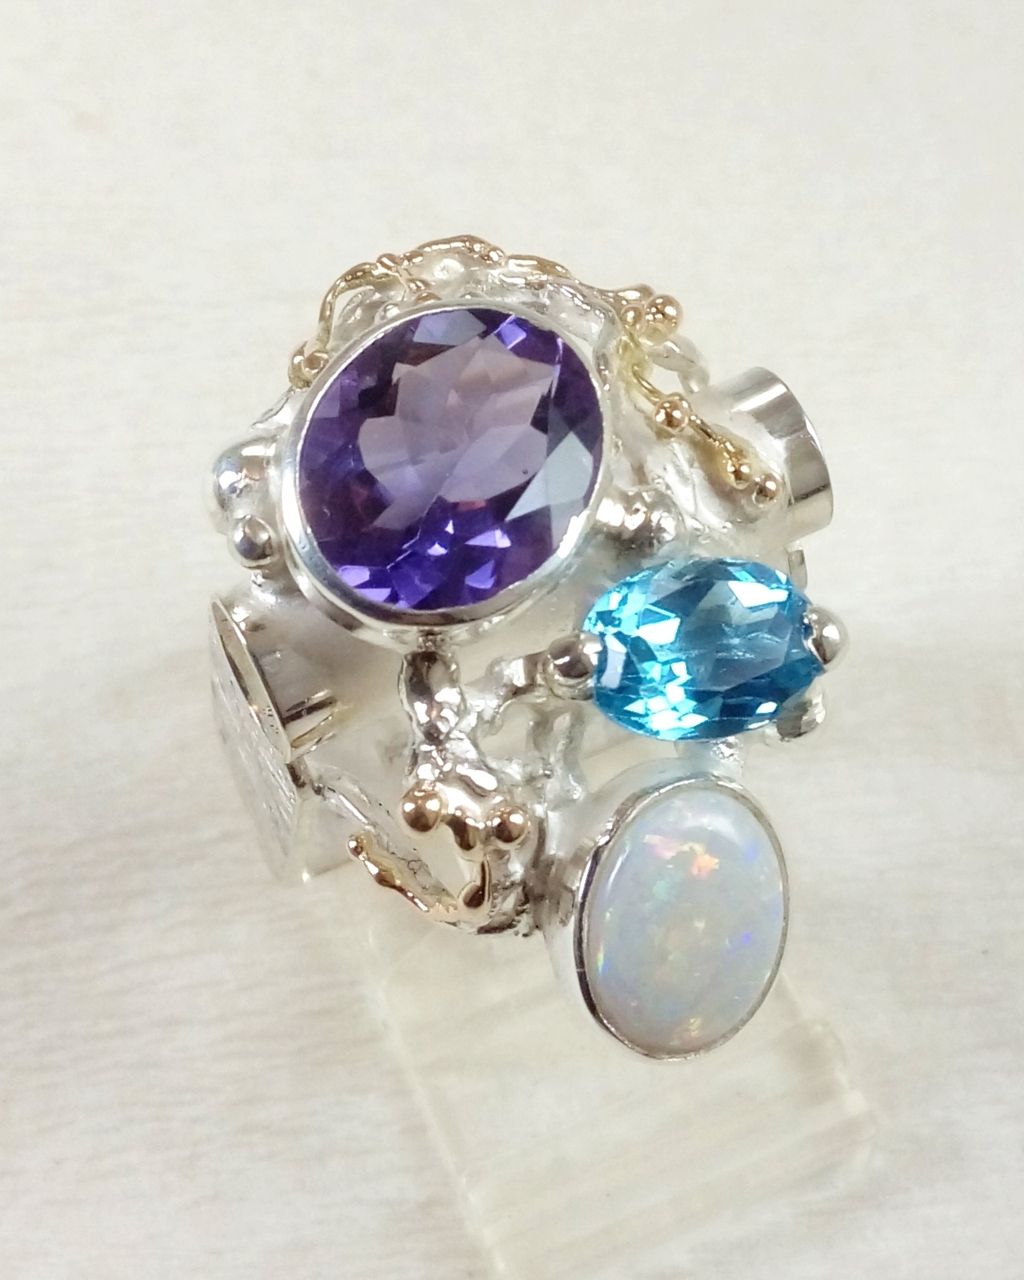 gregory pyra piro art jewelry, jewelry similar to american art, handcrafted ring 2055, ring with amethyst and blue topaz, ring with opal and gemstones, rings sold in art galleries, rings handmade by artist, jewelry gift for mom who likes retro style, handmade gifts and jewelry for mom who likes antiques and retro fashion, jewellery like at the desire fair